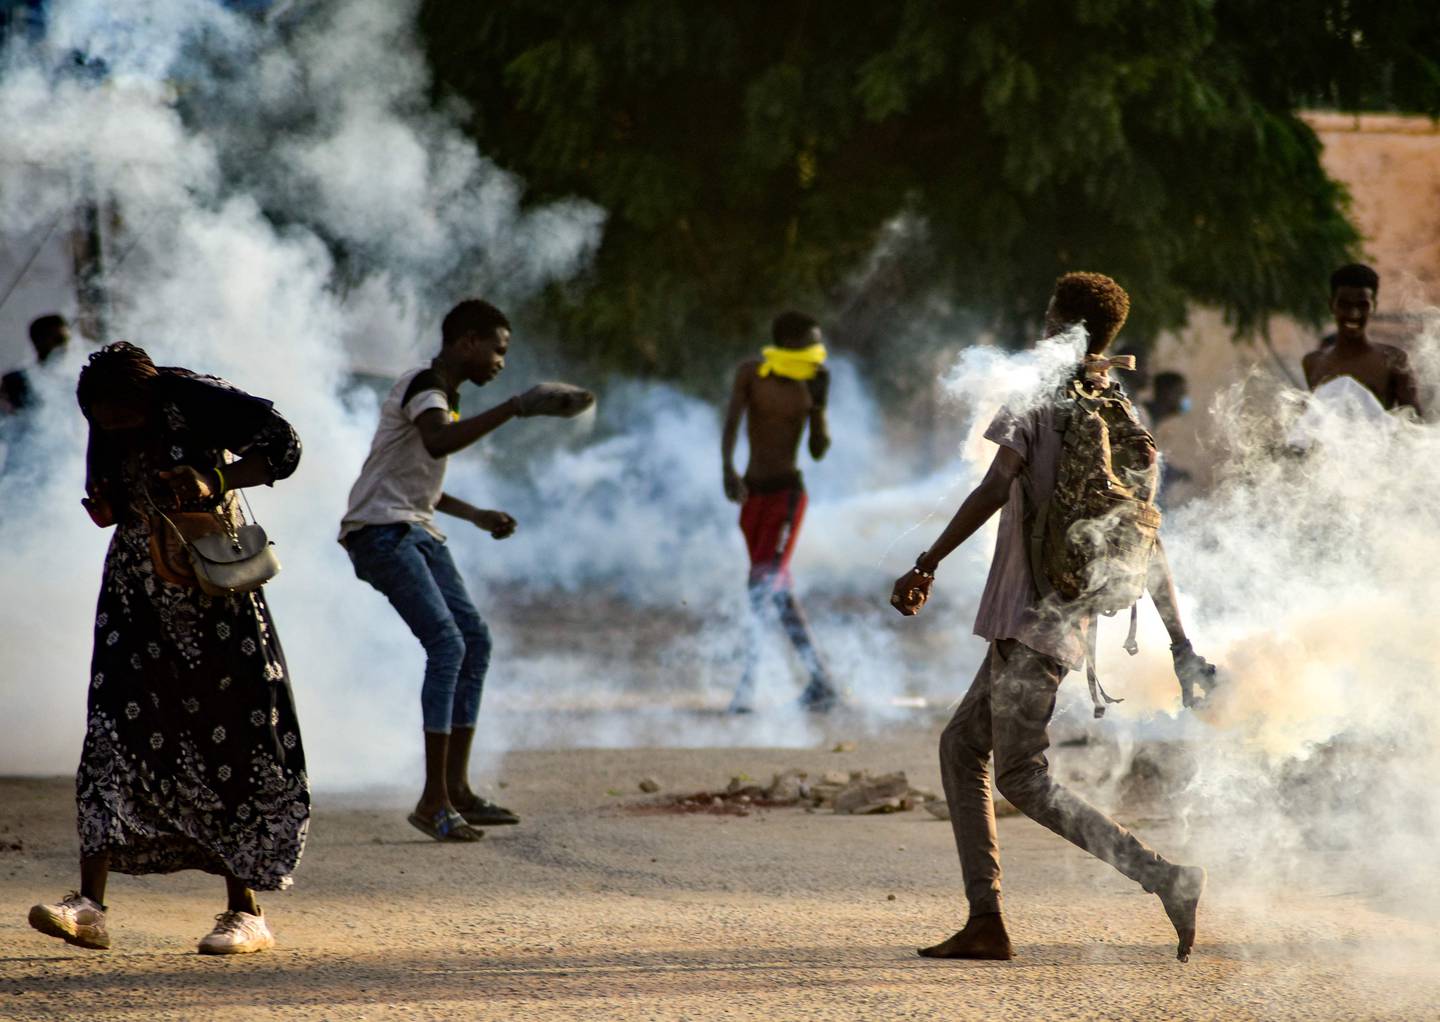 Sudanese youths confront security forces as tear gas is fired to disperse protesters in the capital, Khartoum. AFP